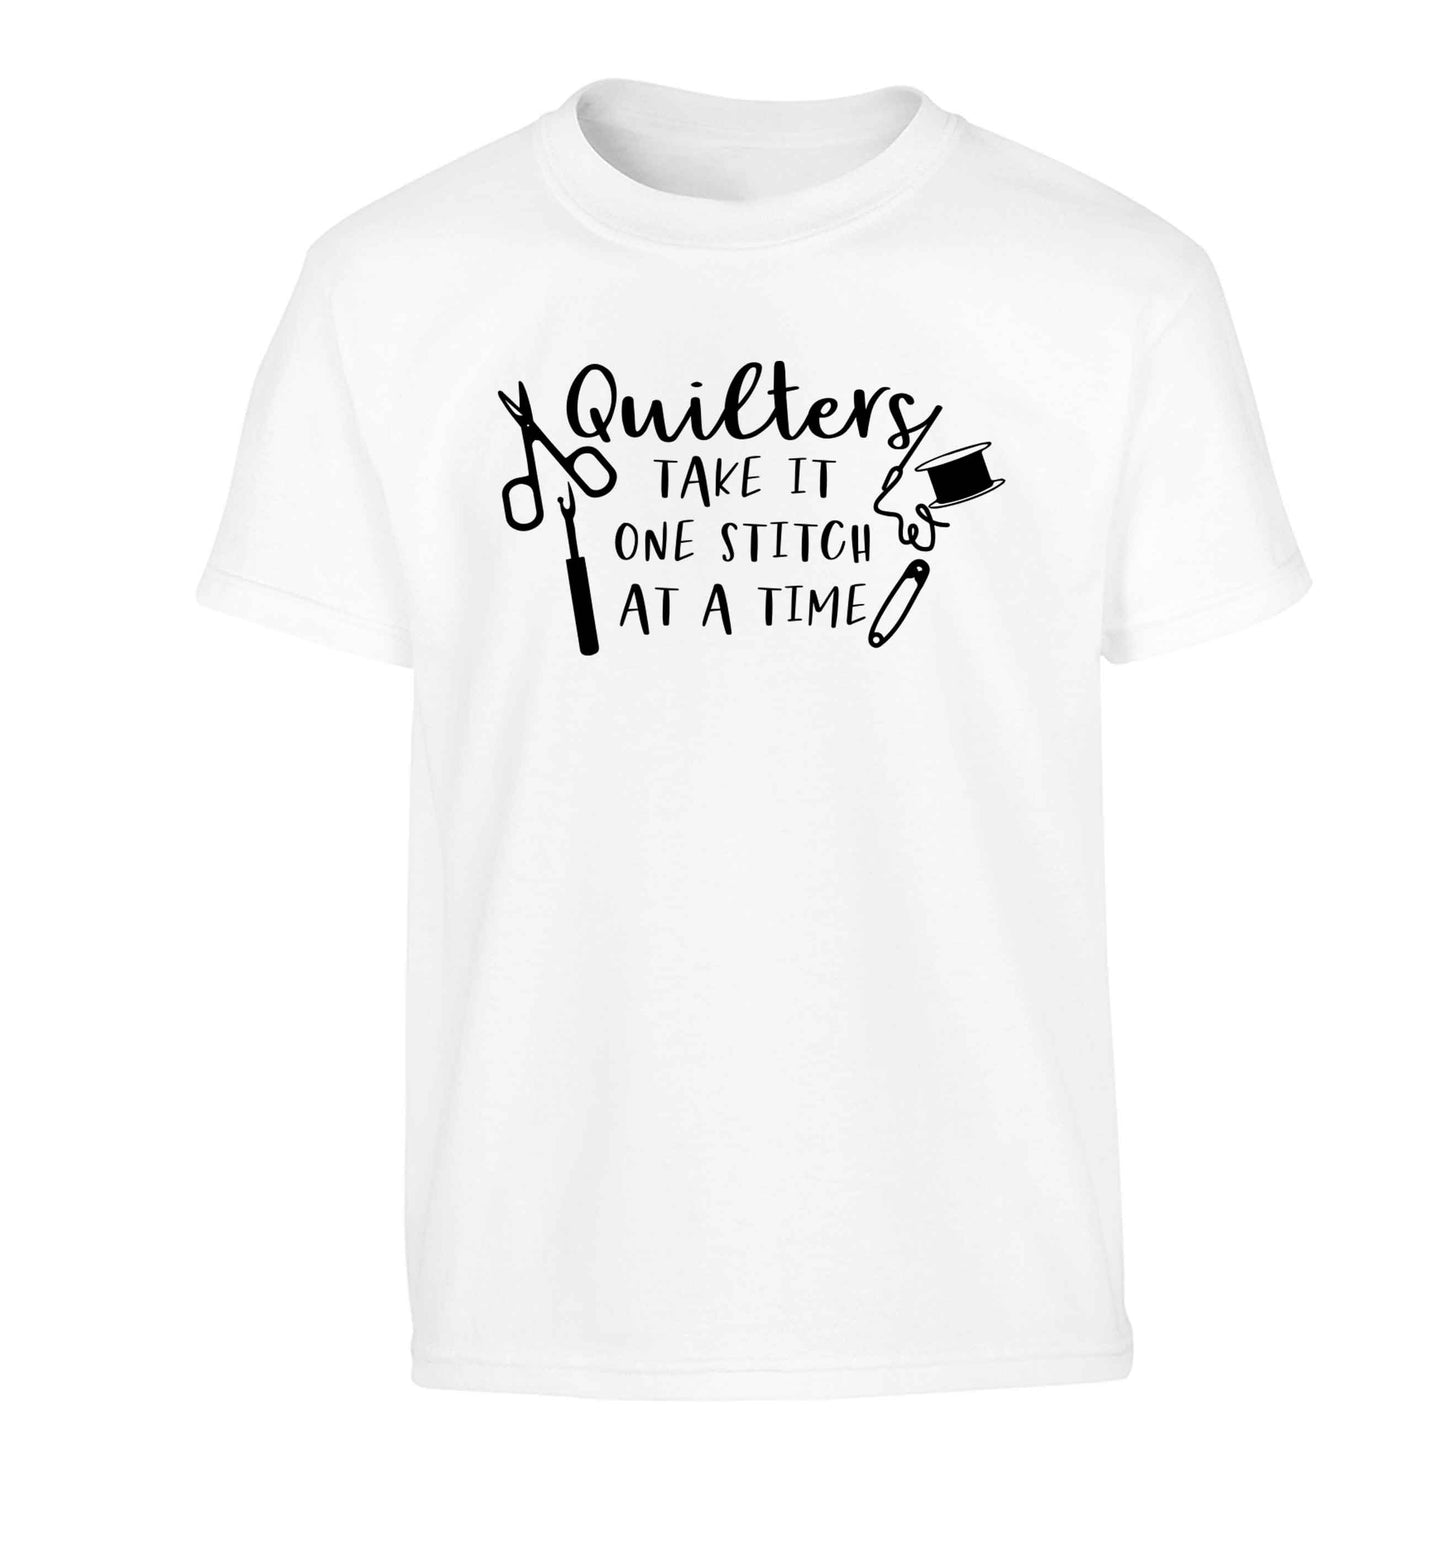 Quilters take it one stitch at a time  Children's white Tshirt 12-13 Years